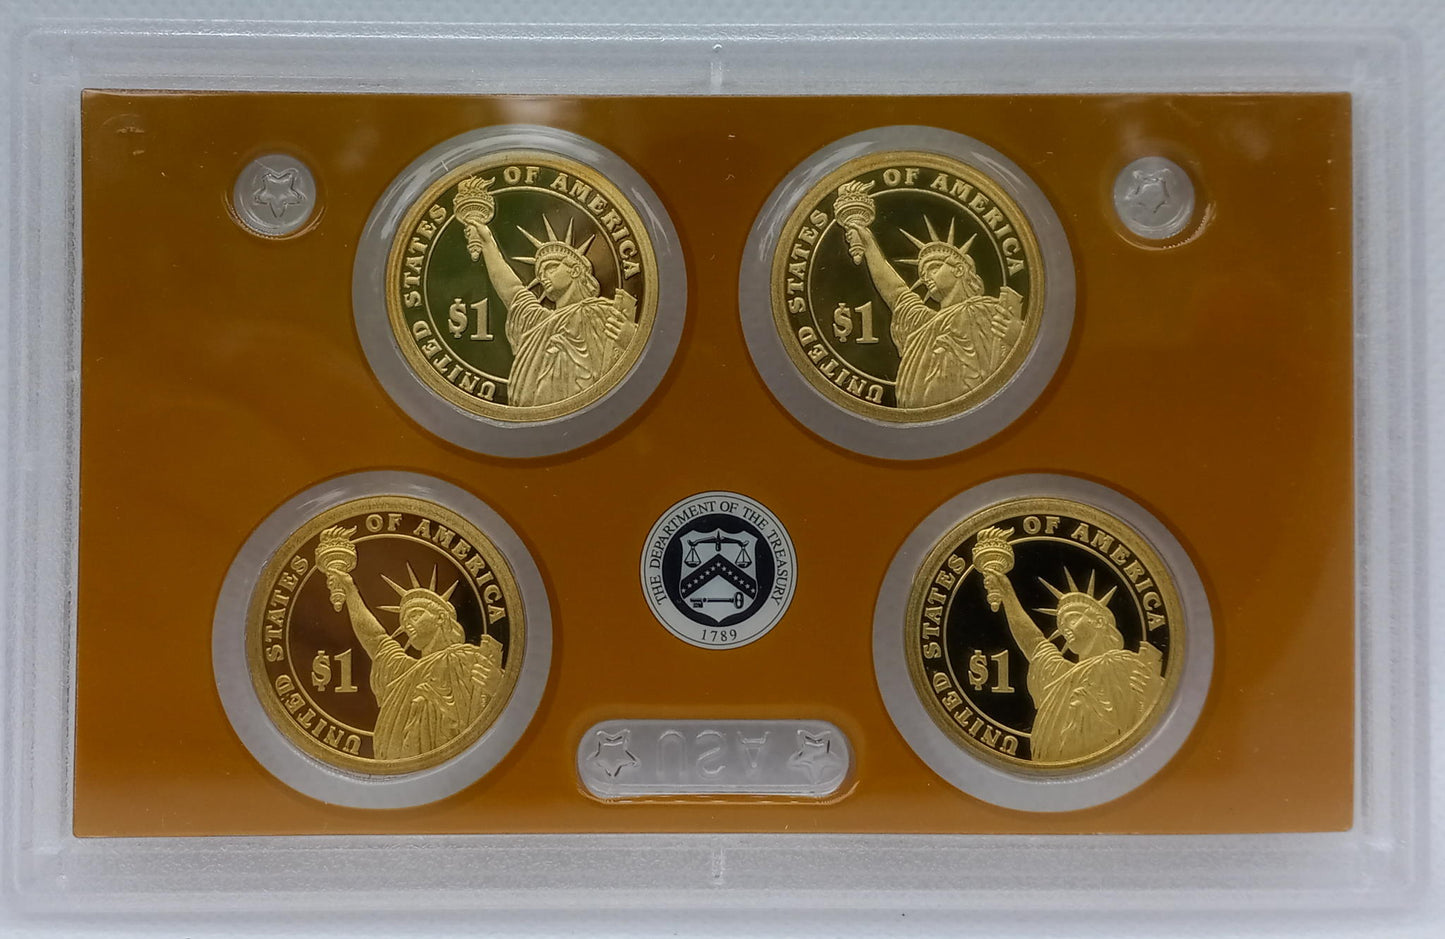 2011 United States Mint PRESIDENTIAL DOLLAR COIN PROOF SET With OGP & COA!